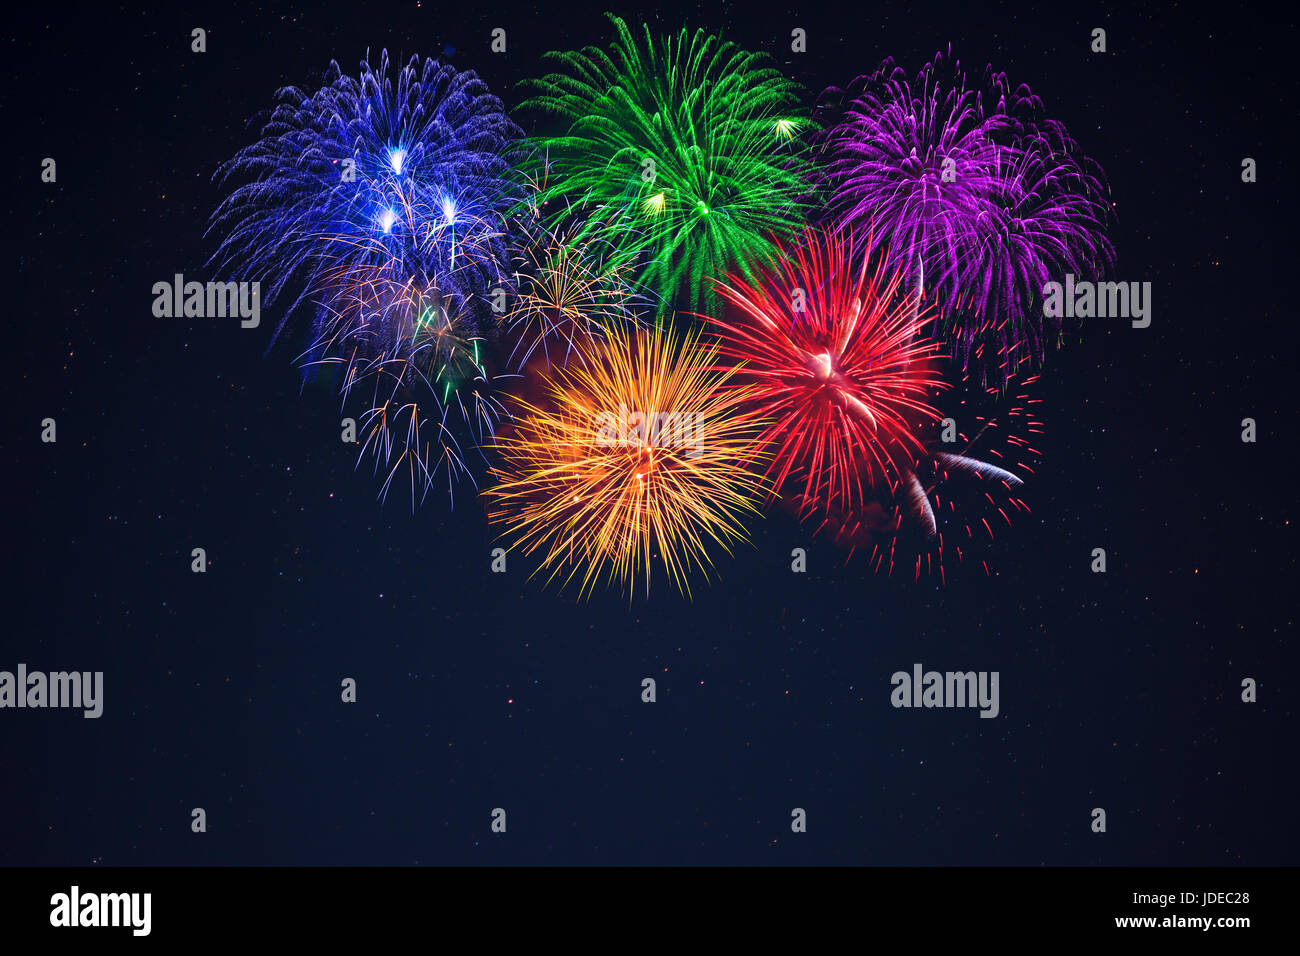 Sparkling blue green purple red yellow celebration fireworks over starry sky.  Independence Day, 4th of July, New Year holidays salute background. Stock Photo